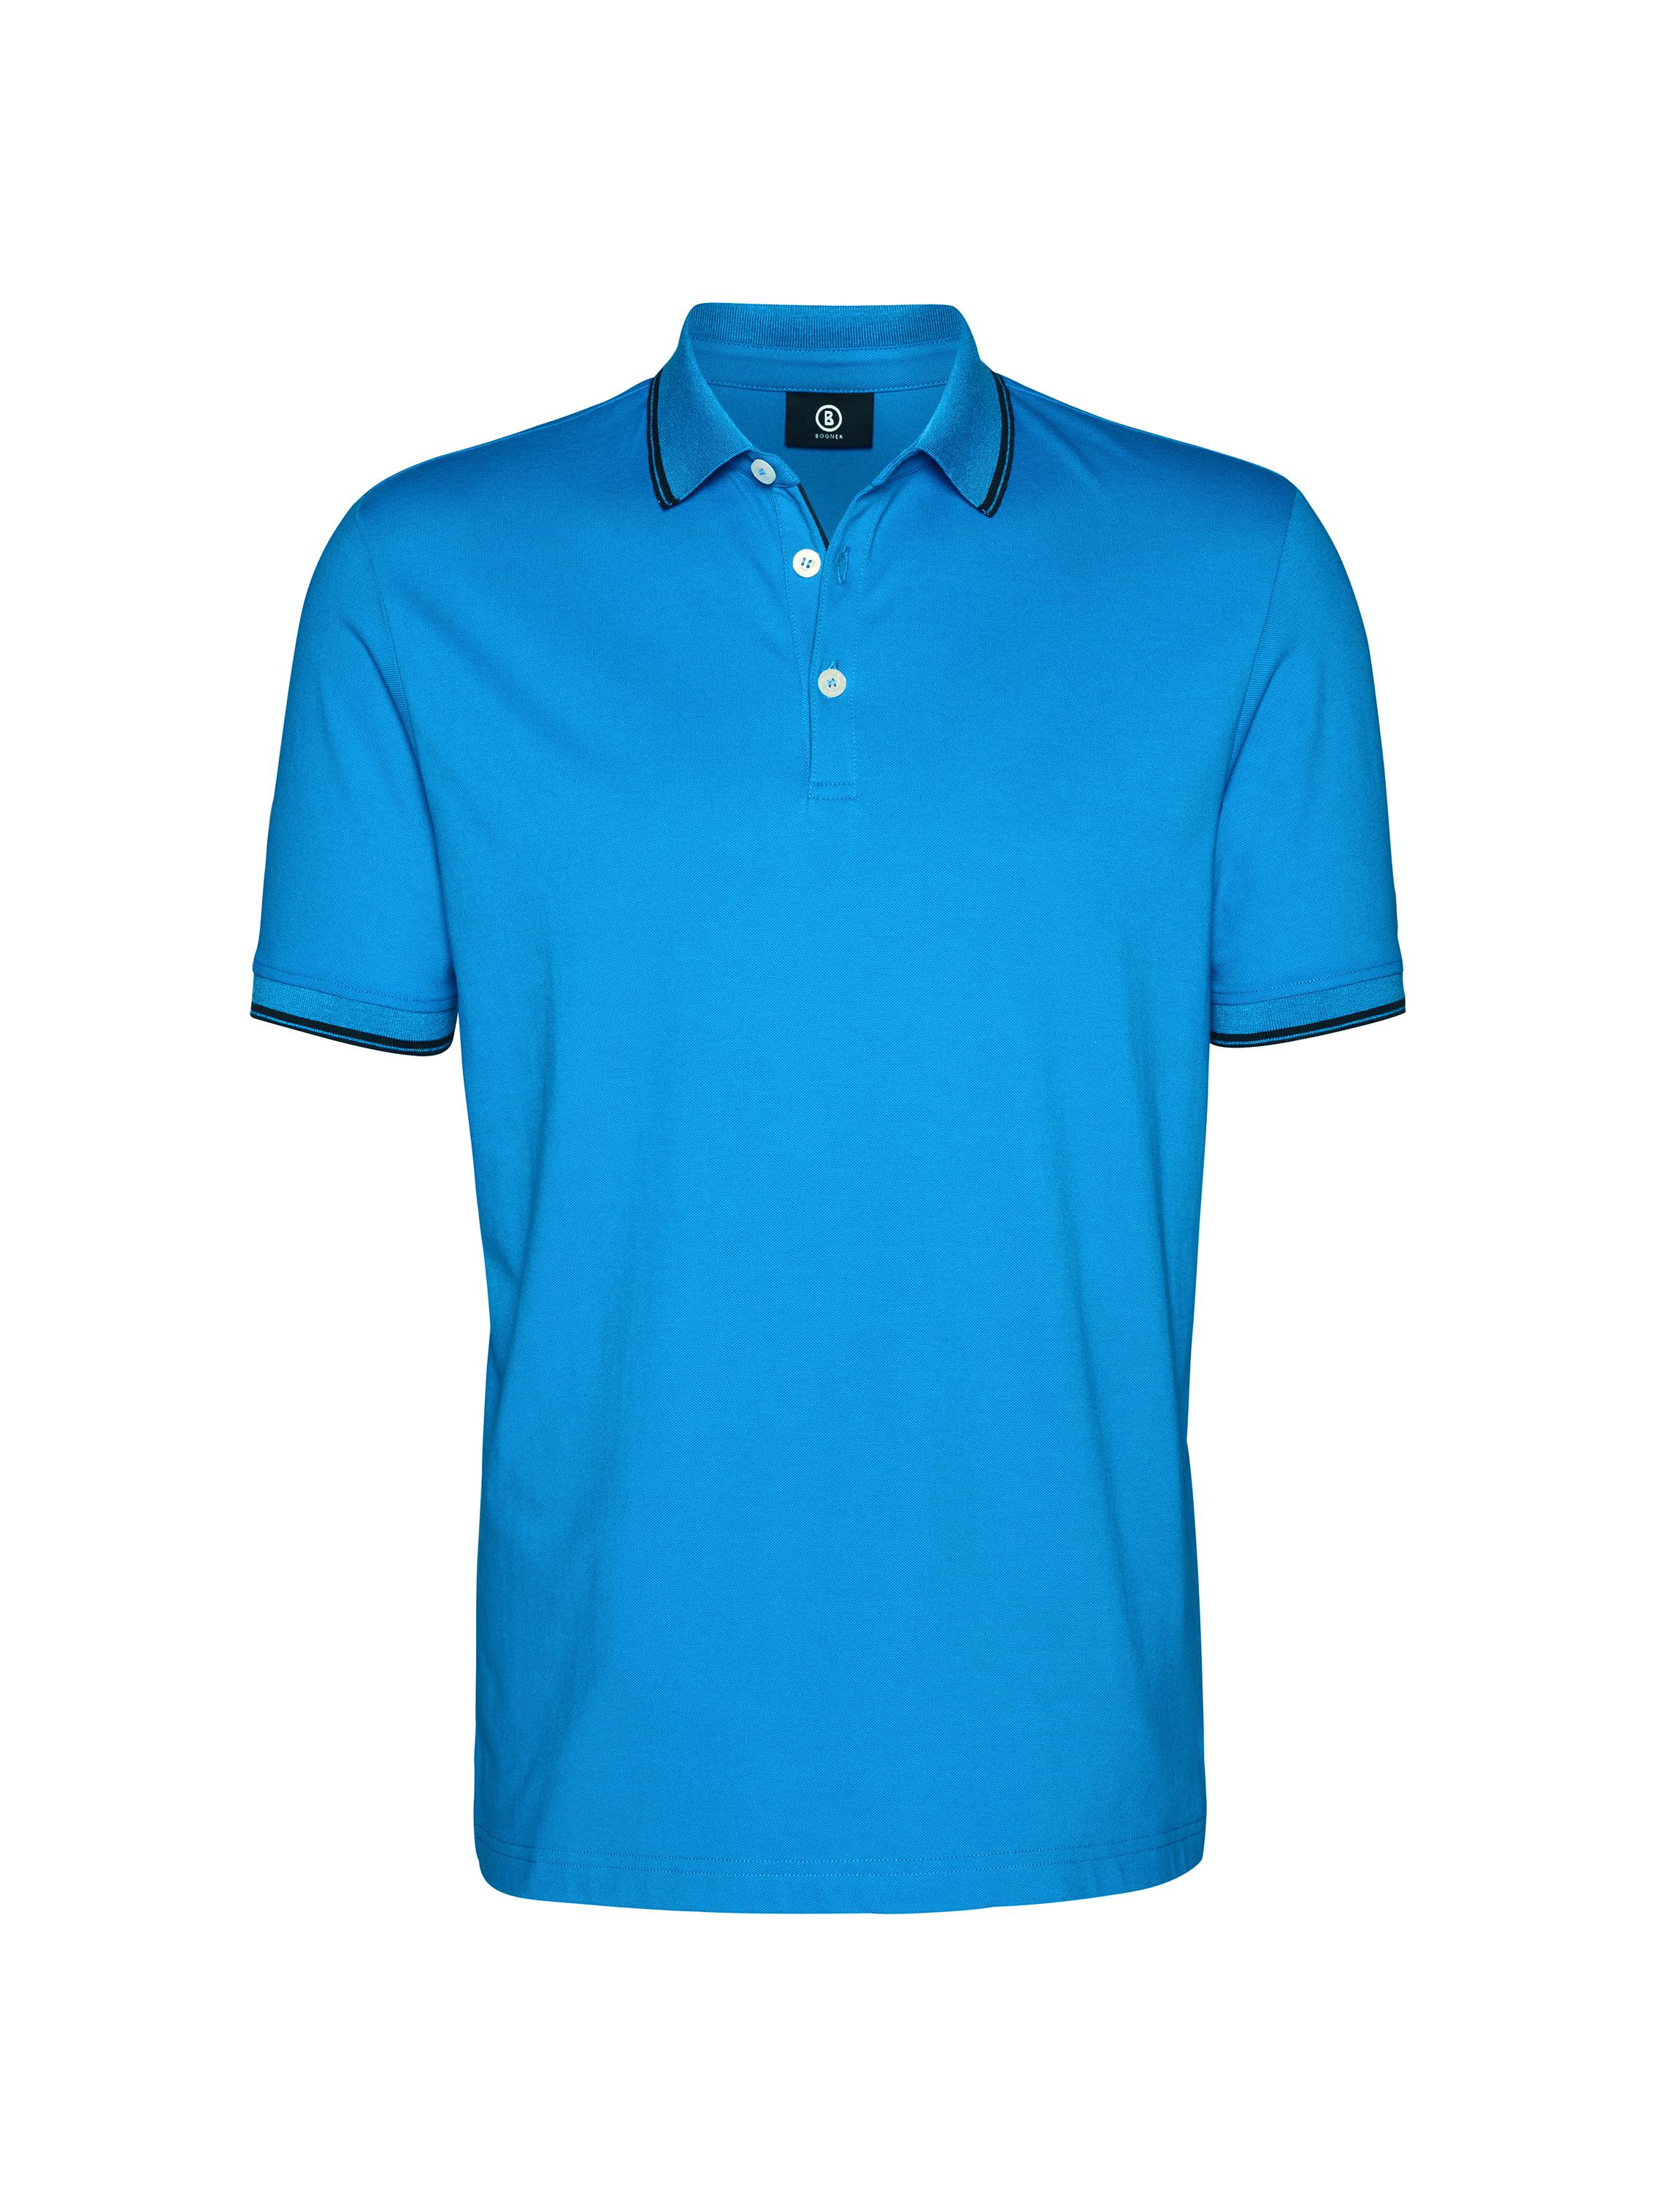 Bogner Synthetic Golf Polo Shirt Alex in Blue for Men - Lyst